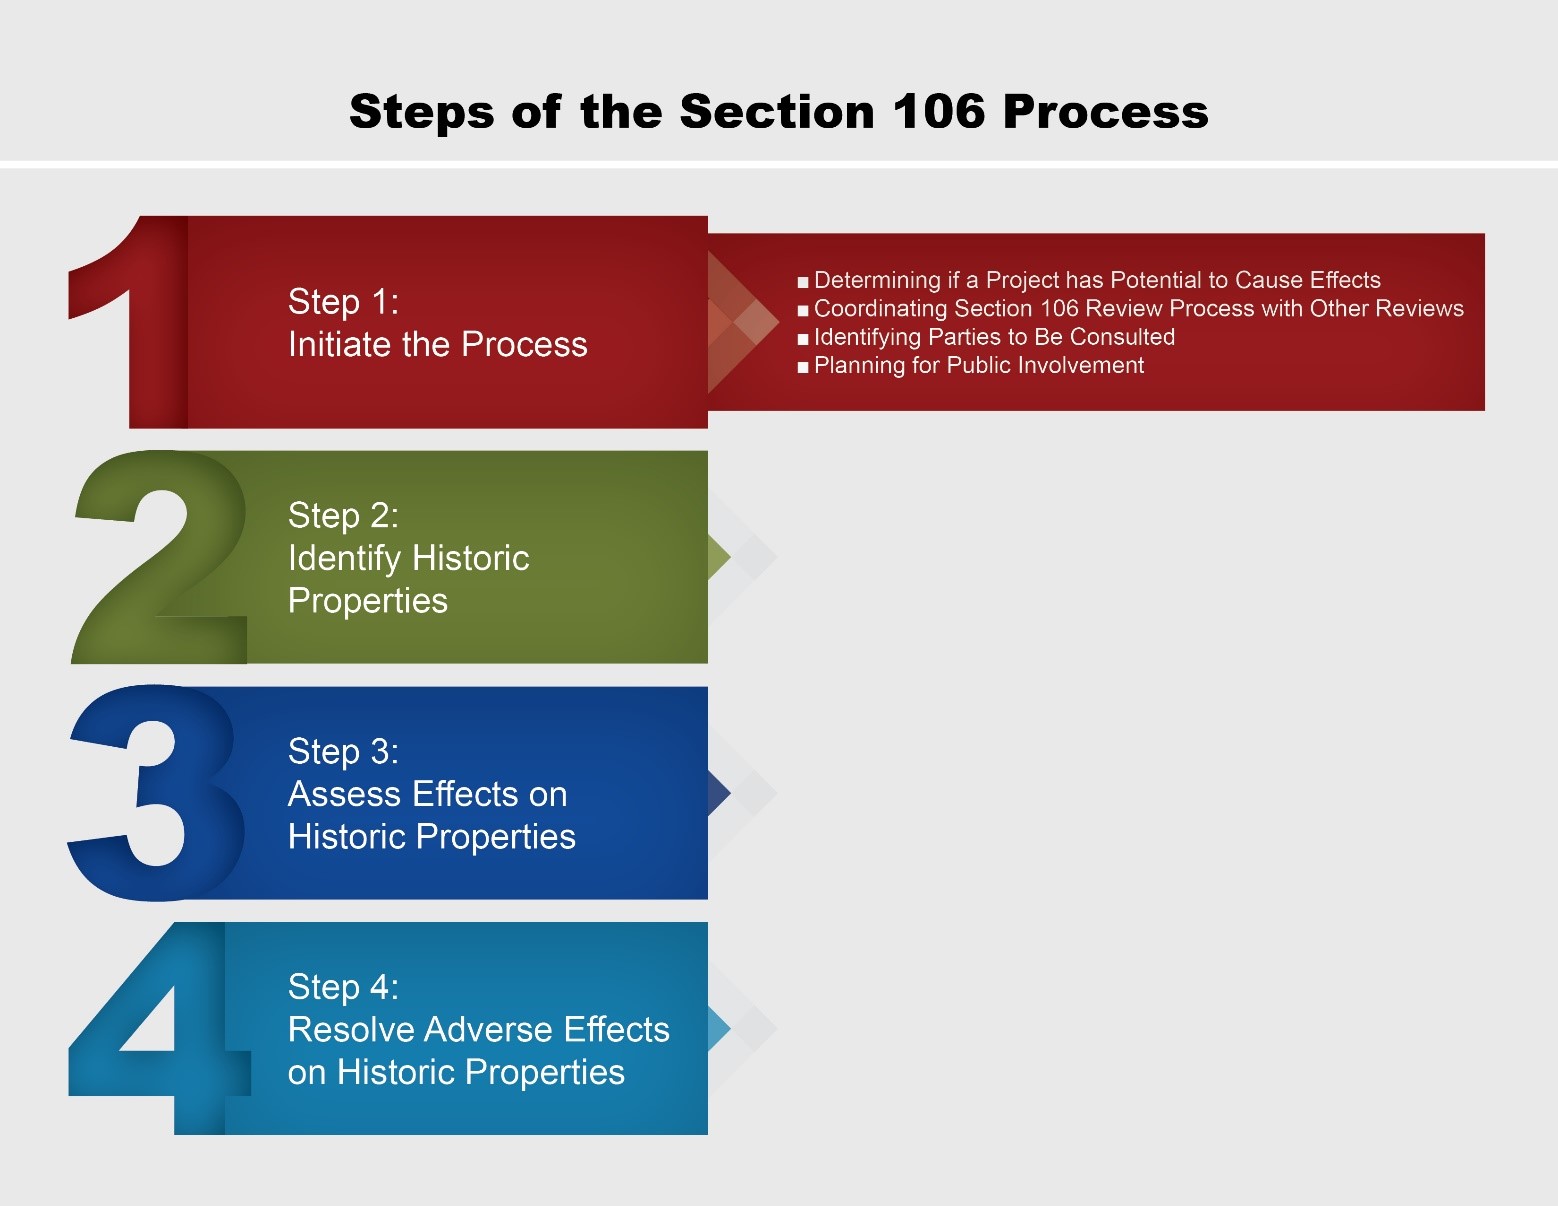 The four steps of the Section 106 process. 1. Initiate the process, 2. identify historic properties, 3. assess effects on historic properties, 4. resolve adverse effects on historic properties.